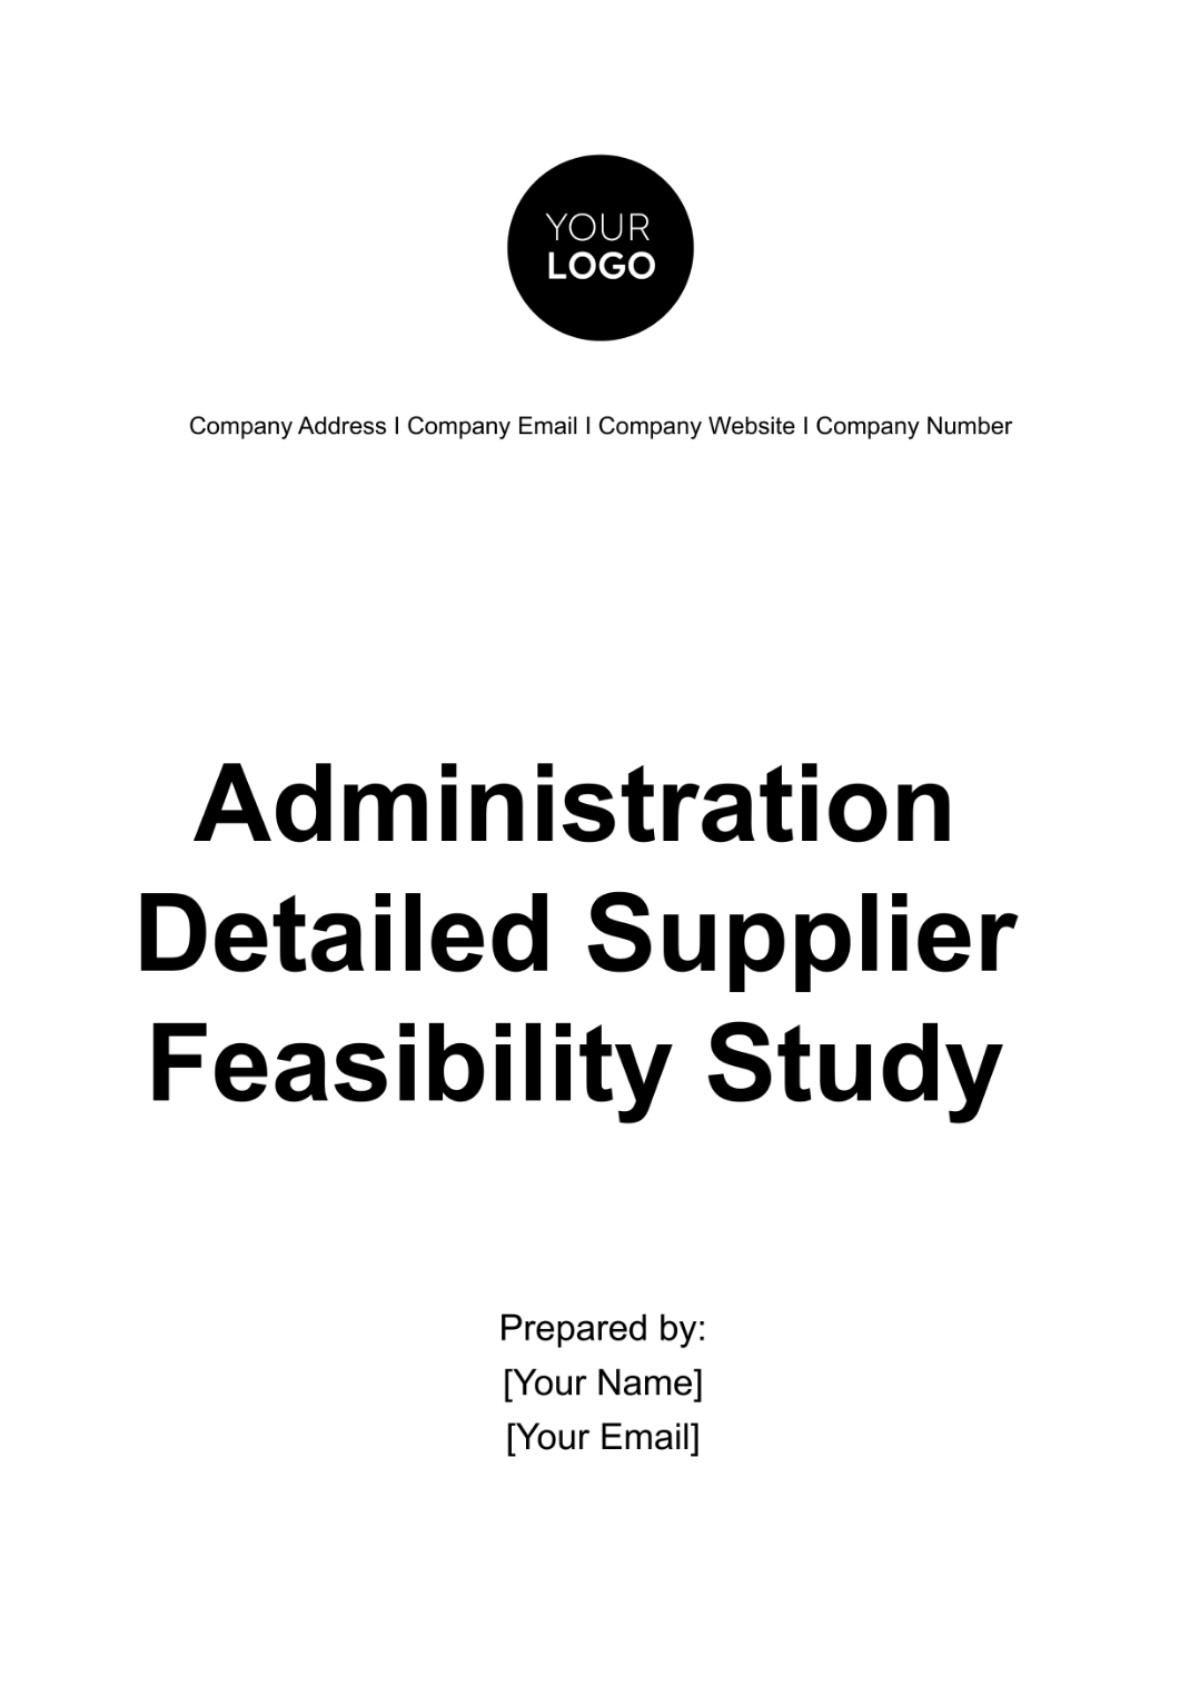 Administration Detailed Supplier Feasibility Study Template